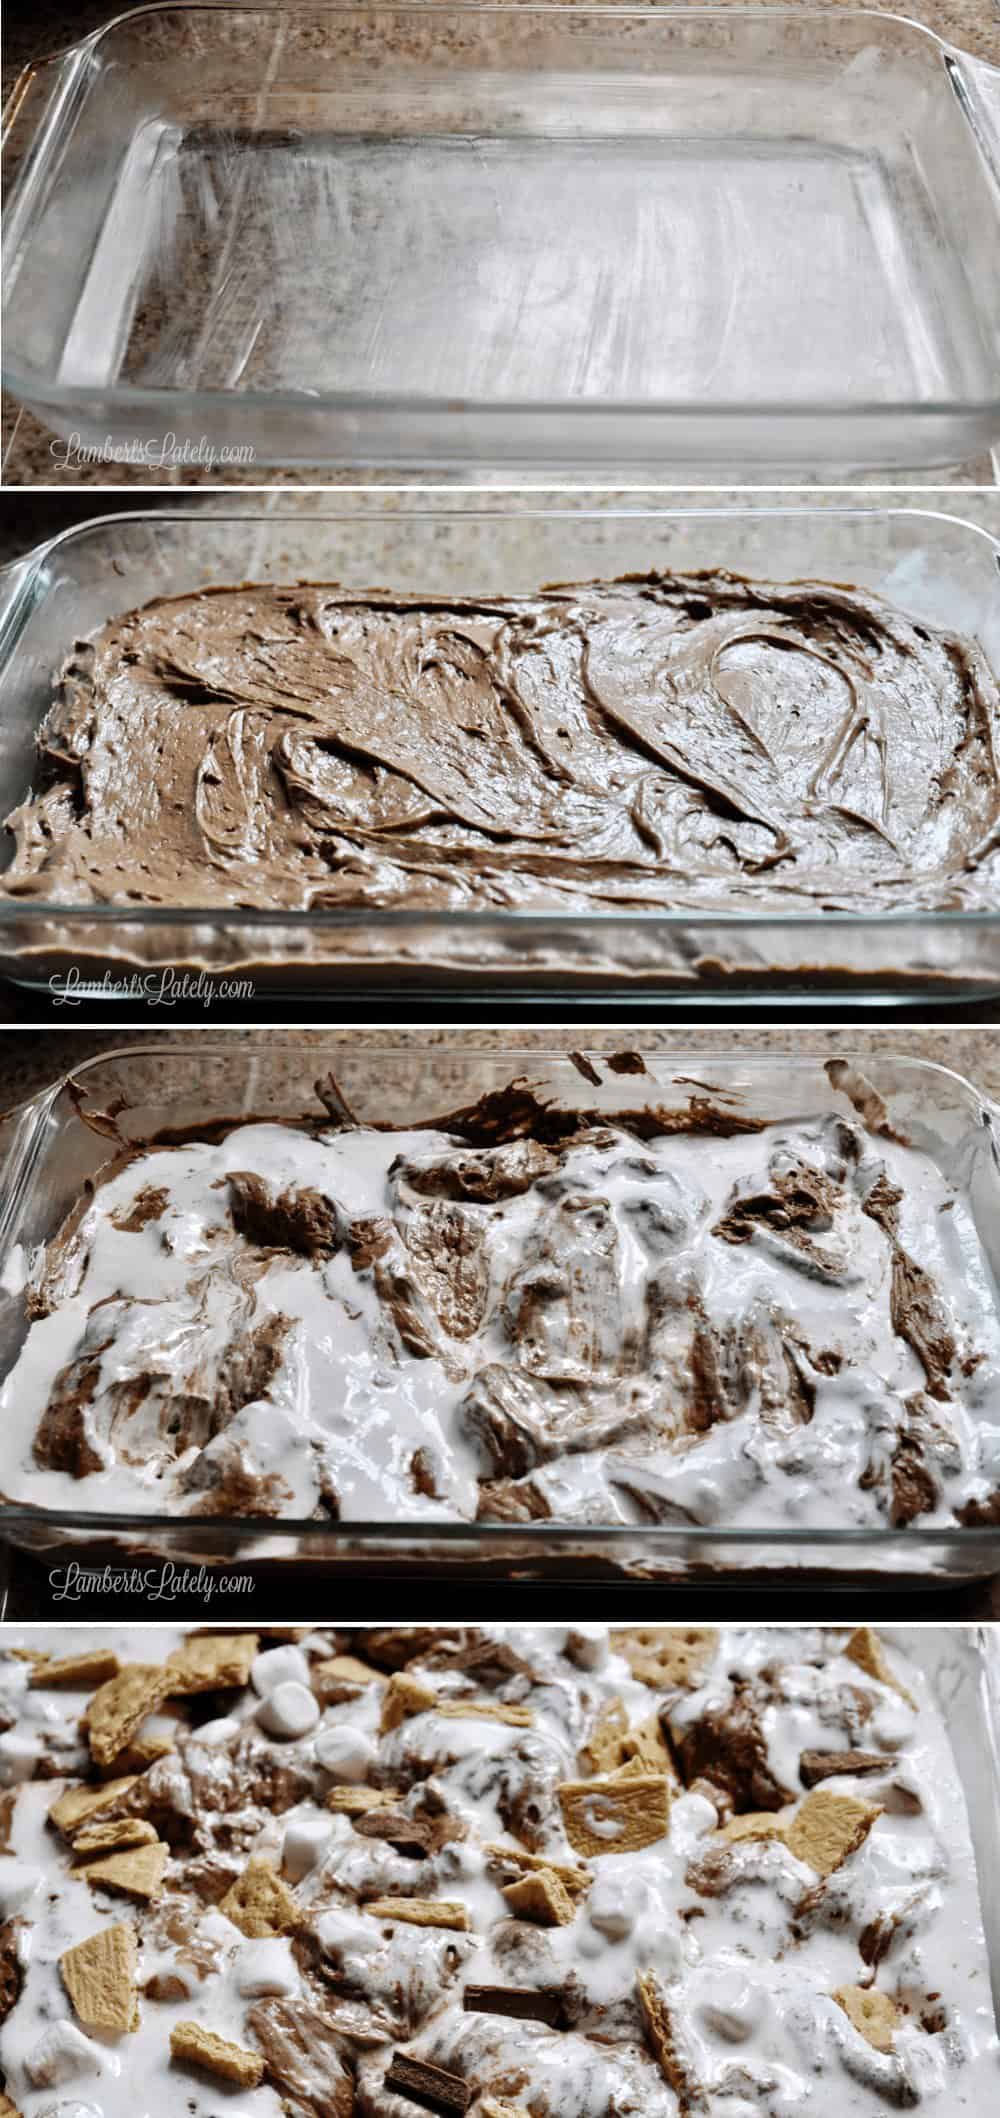 showing progression of making a smores earthquake cake.